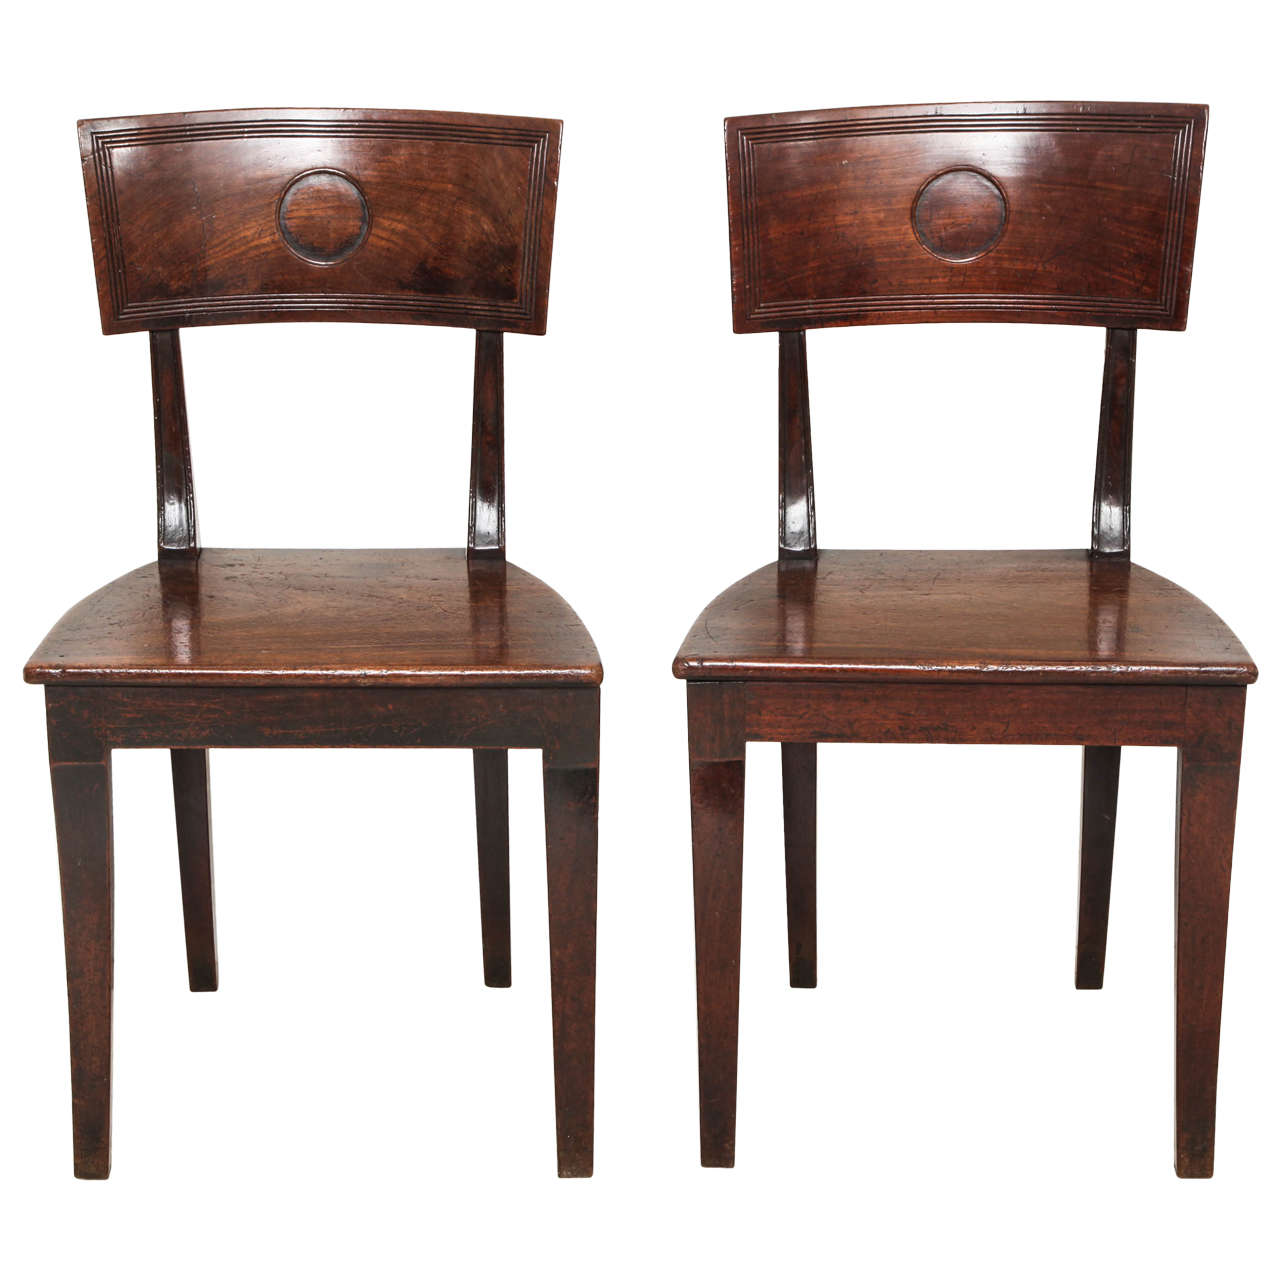 A Pair of English Regency Hall Chairs